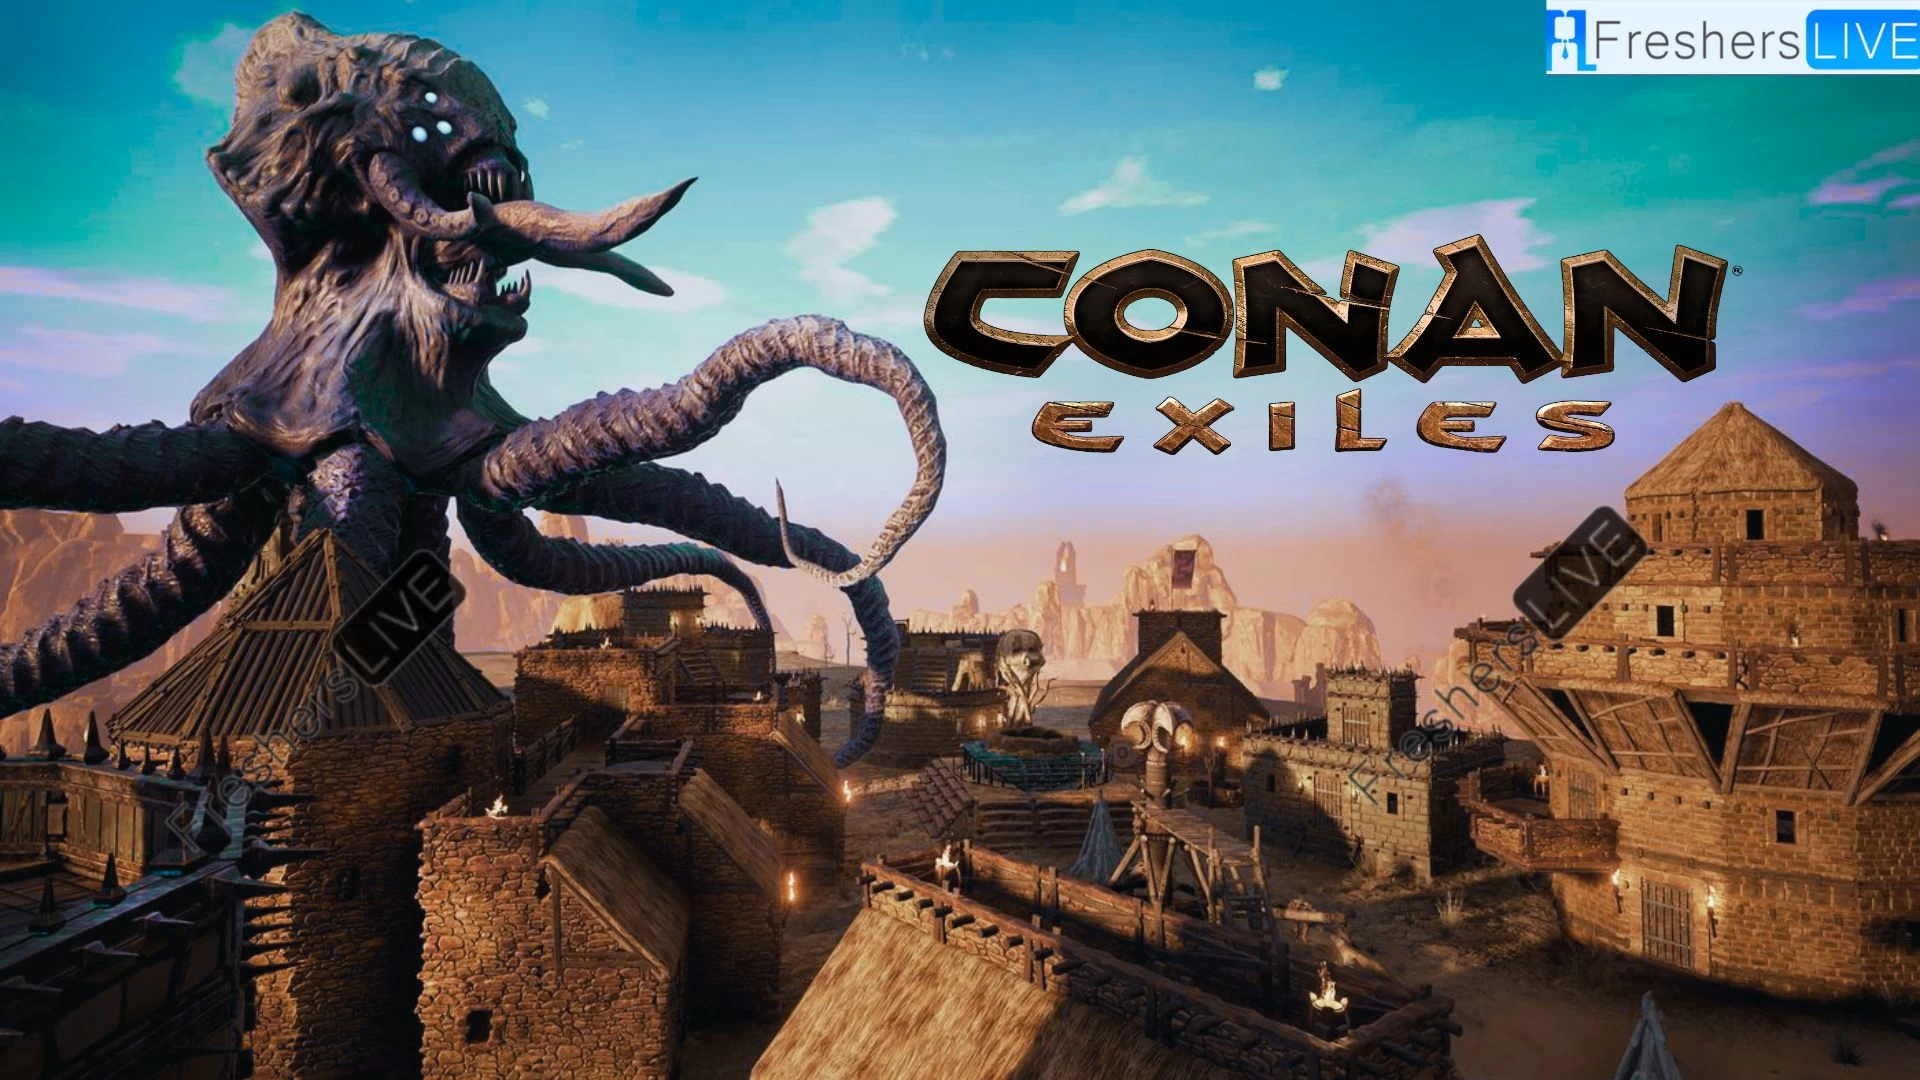 Conan Exiles Update 1.96 Patch Notes: Fixes and Improvements